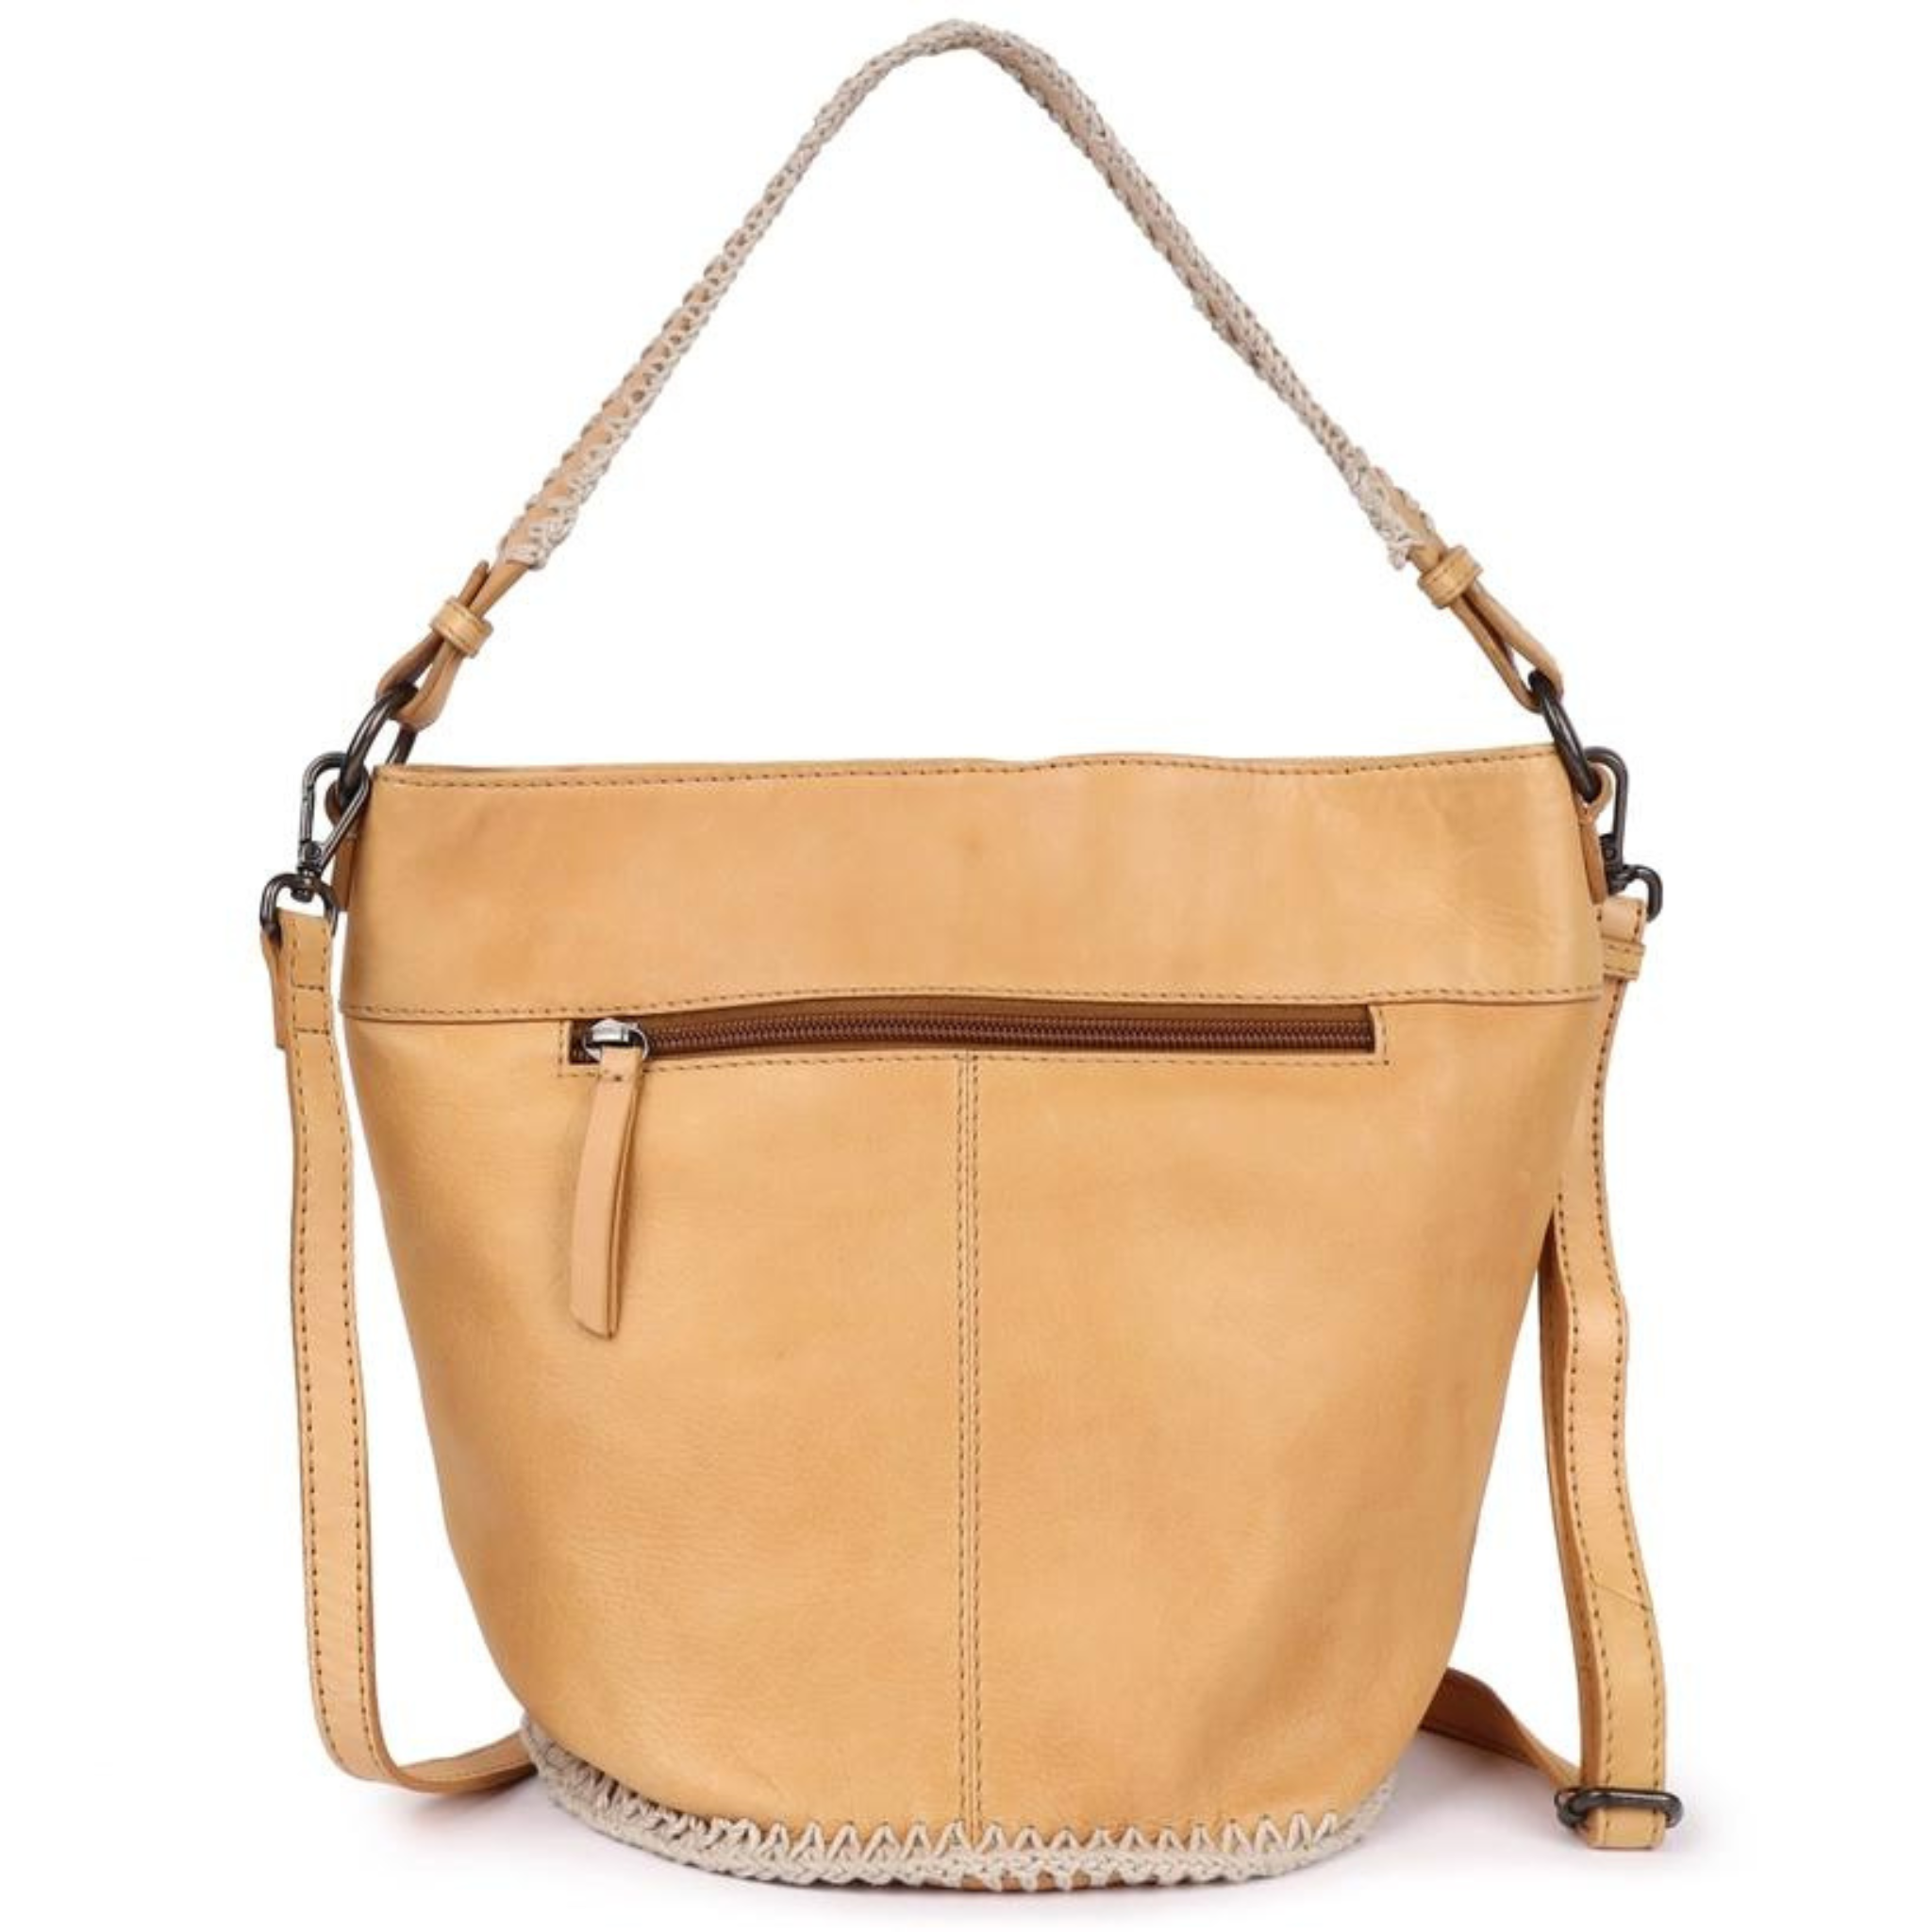 Patsy Handcrafted Leather Shoulder Bag/Crossbody